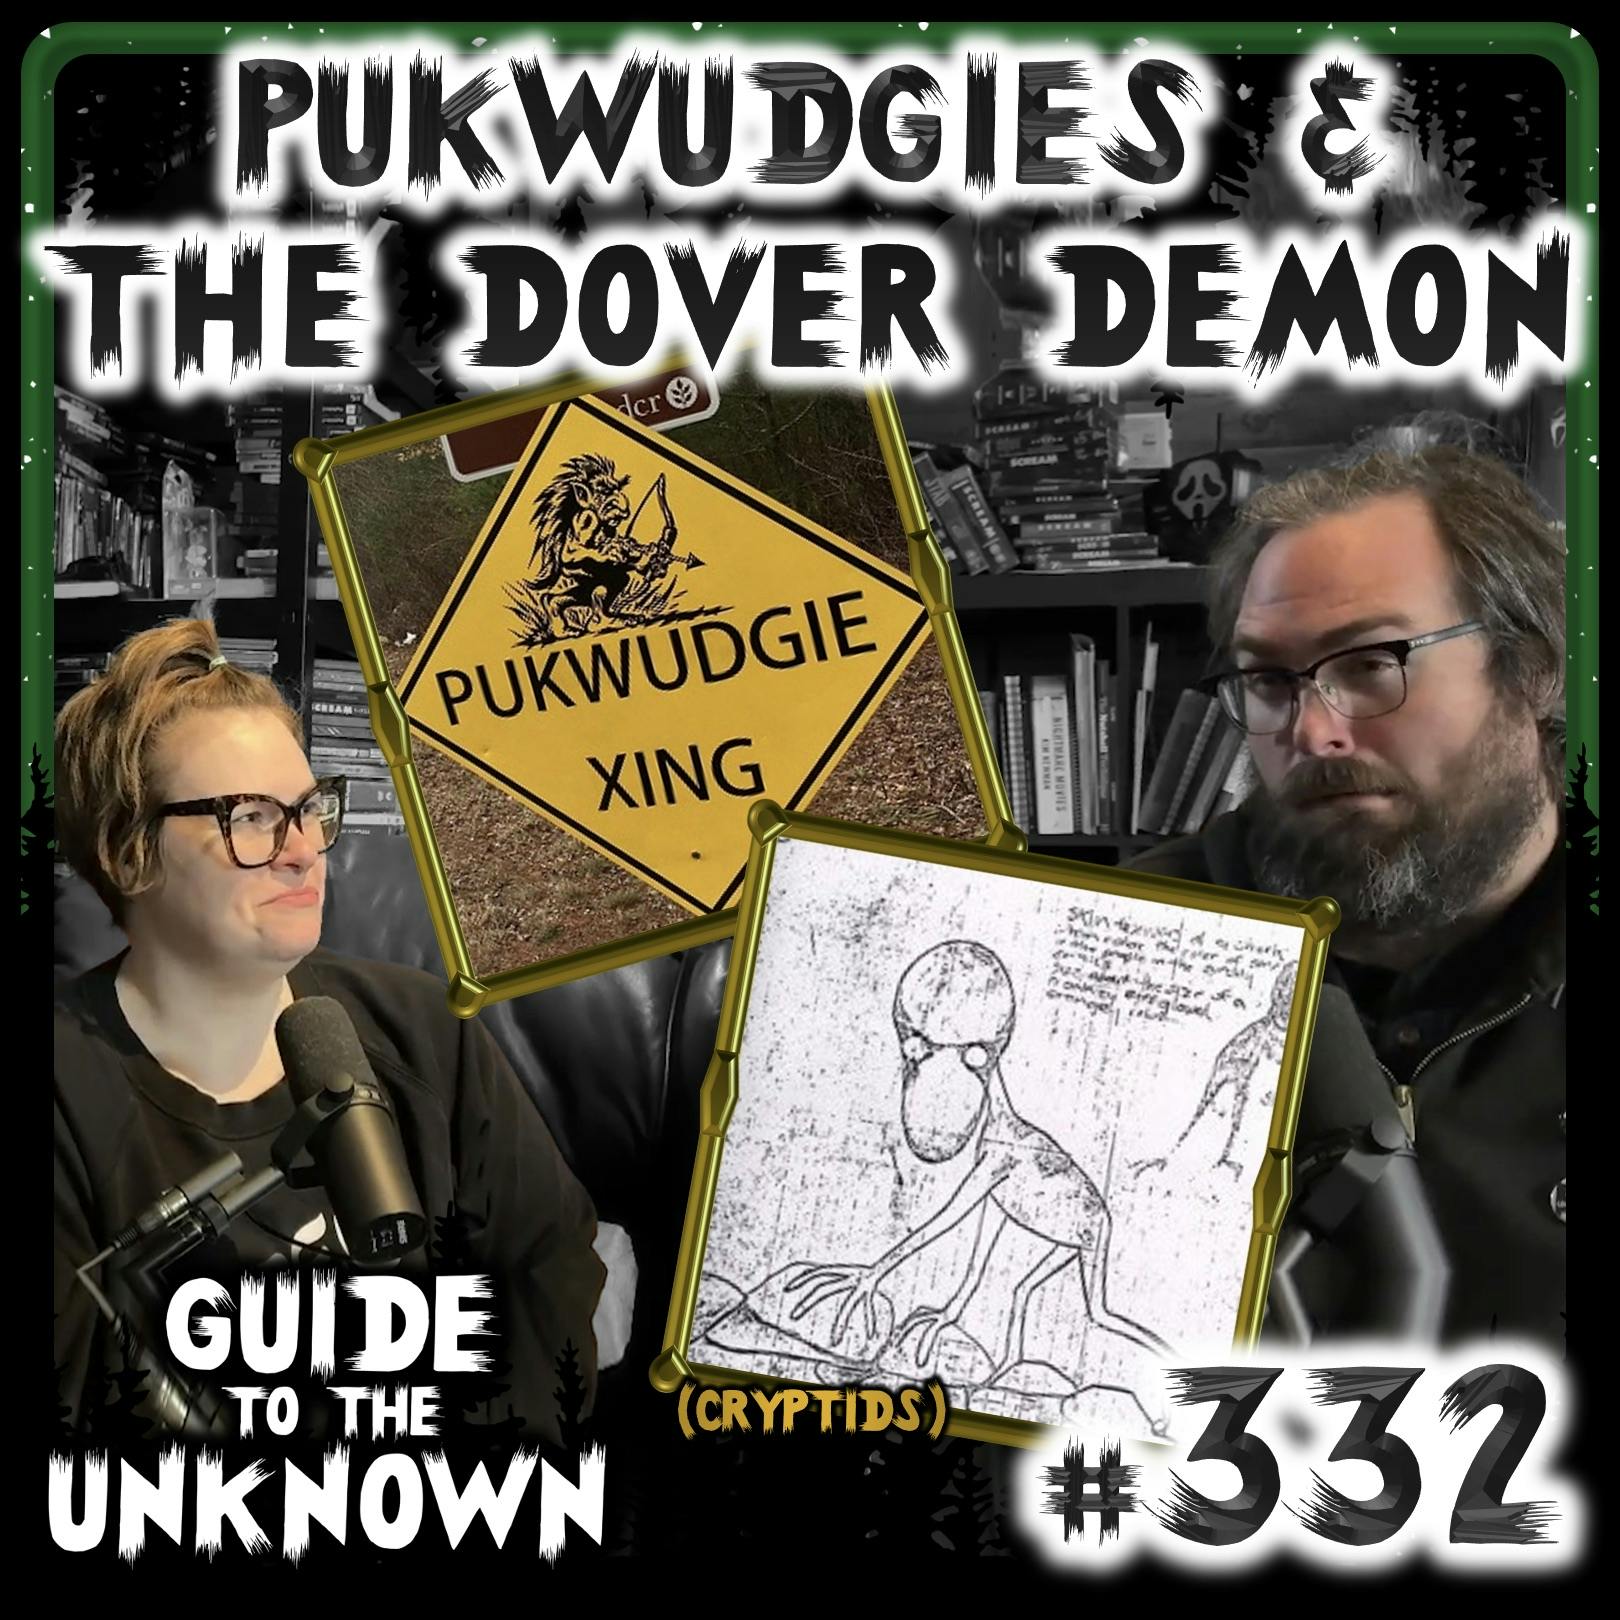 332: Pukwudgies & The Dover Demon (CRYPTIDS)